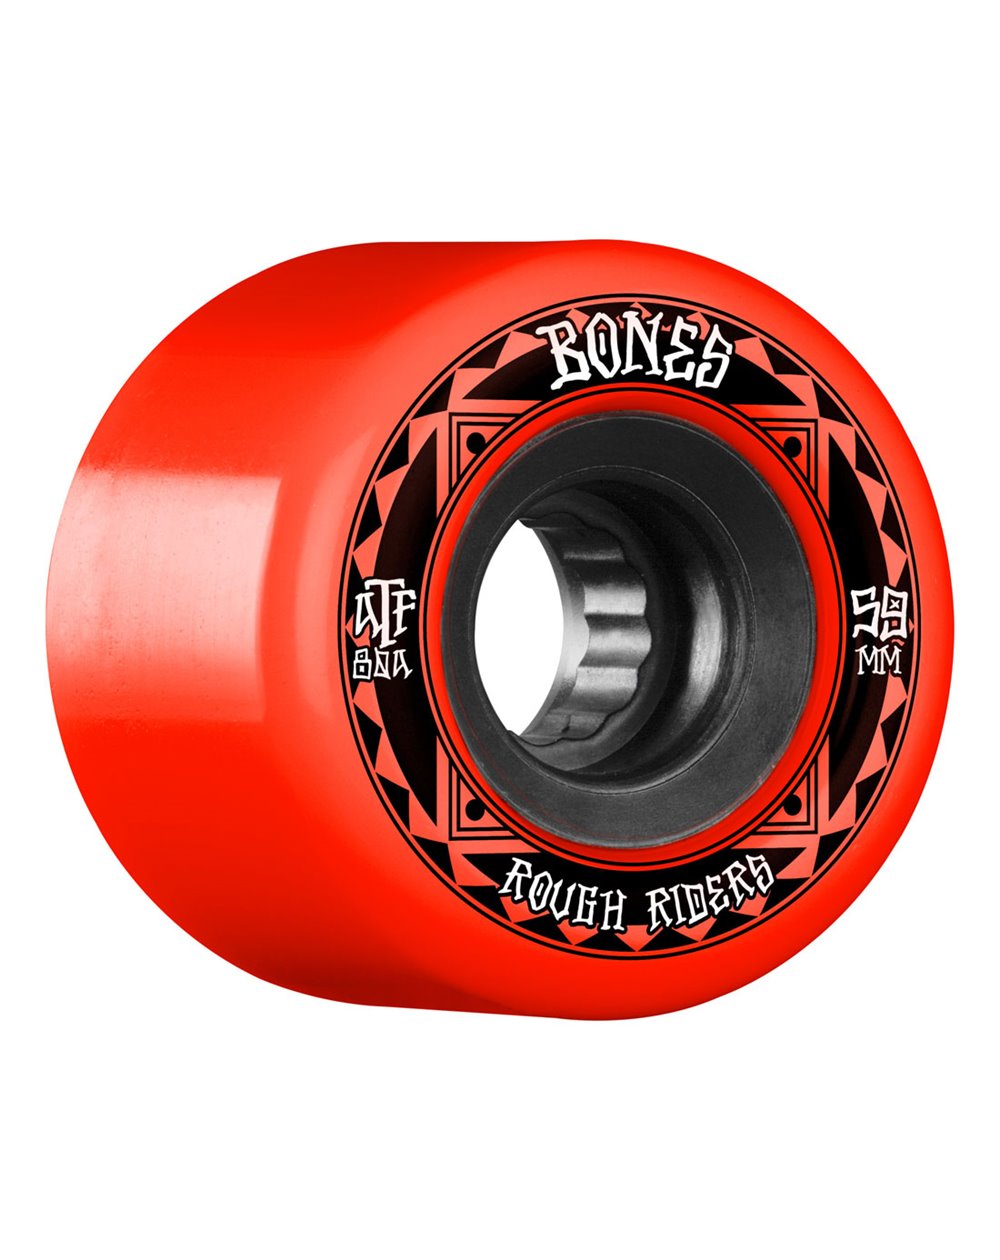 Bones Wheels Roues Skateboard ATF Rough Rider Runners 59mm 80A Red 4 pc